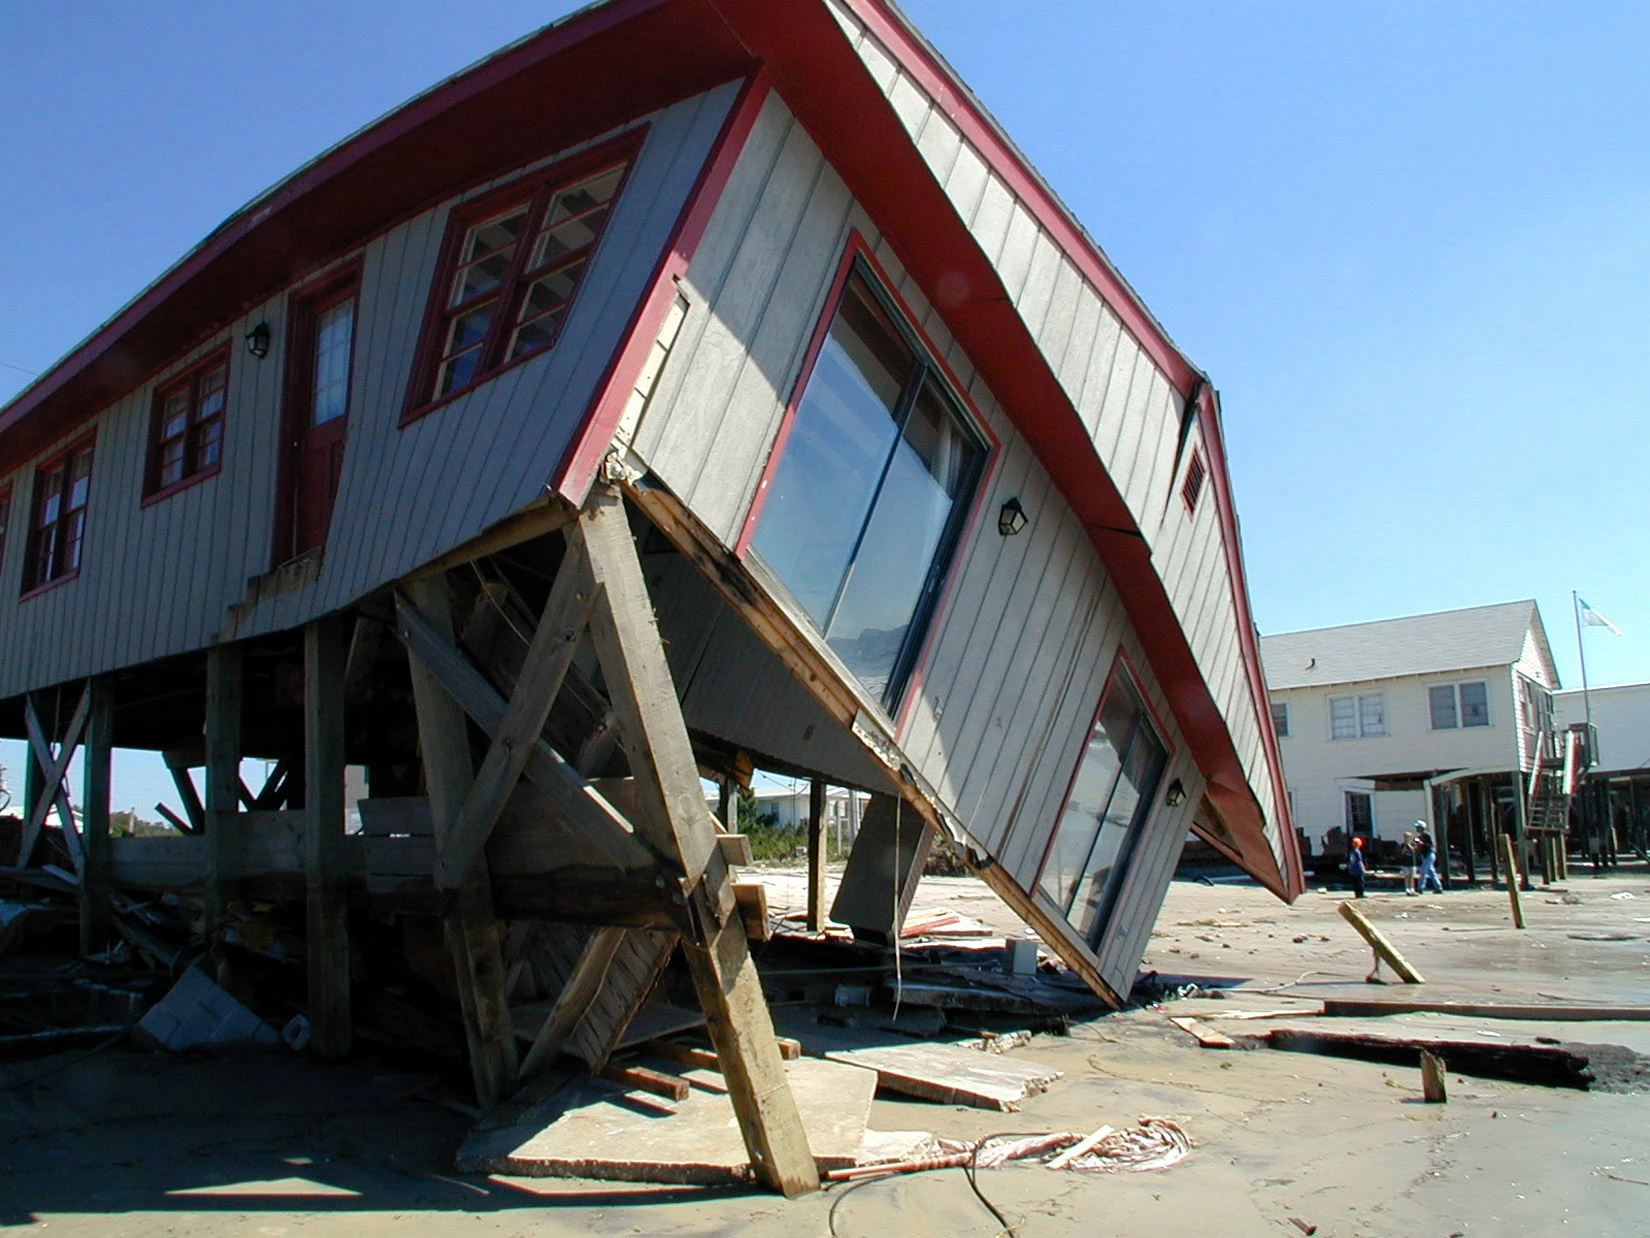 Although elevated, this house in North Carolina could not withstand the 15 ft (4.5 m) of storm surge that came with Hurricane Floyd (1999)